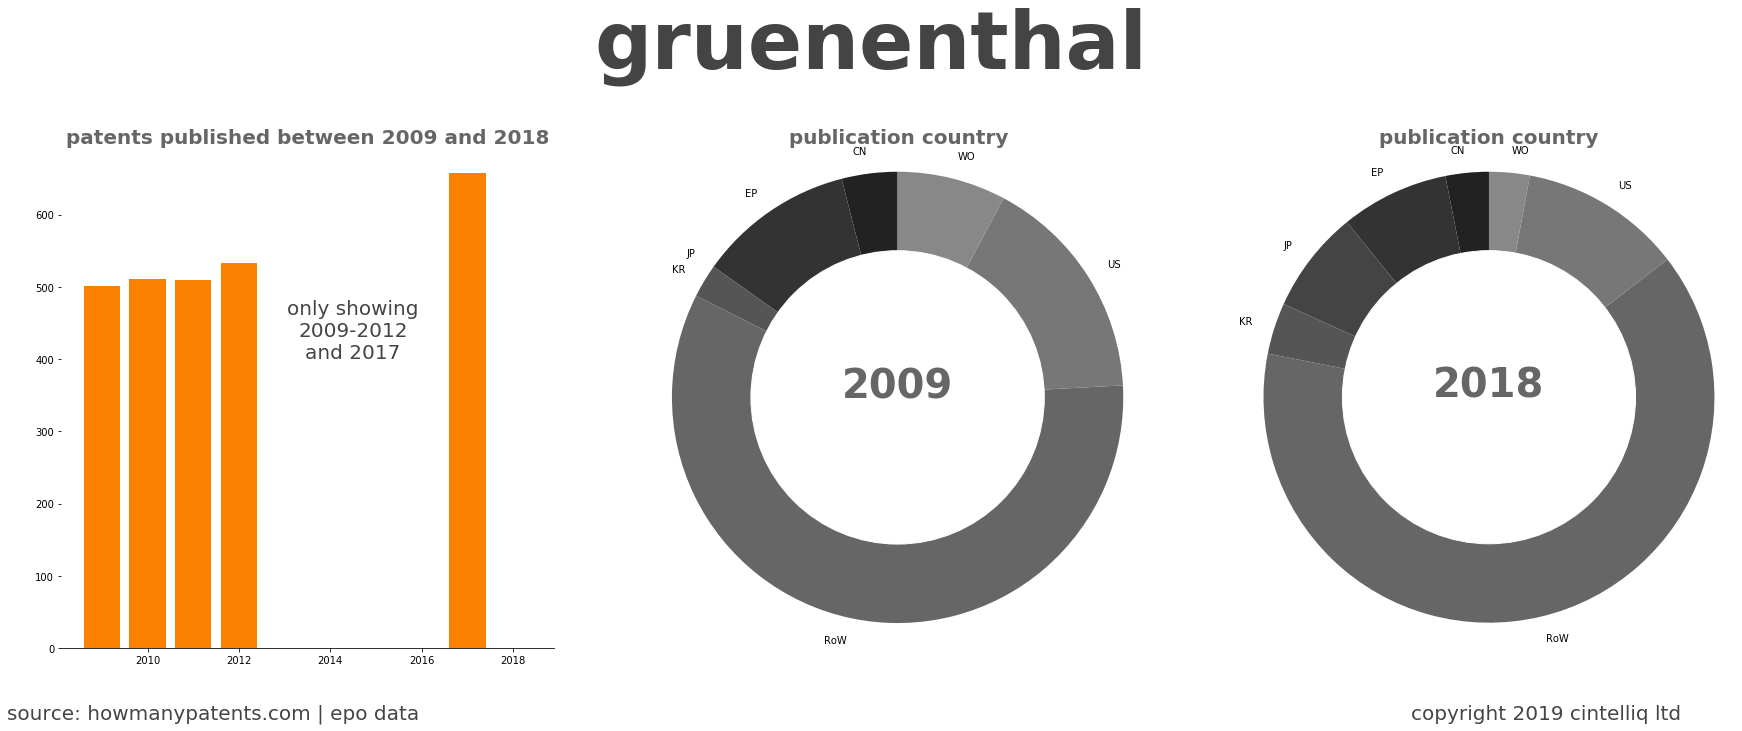 summary of patents for Gruenenthal